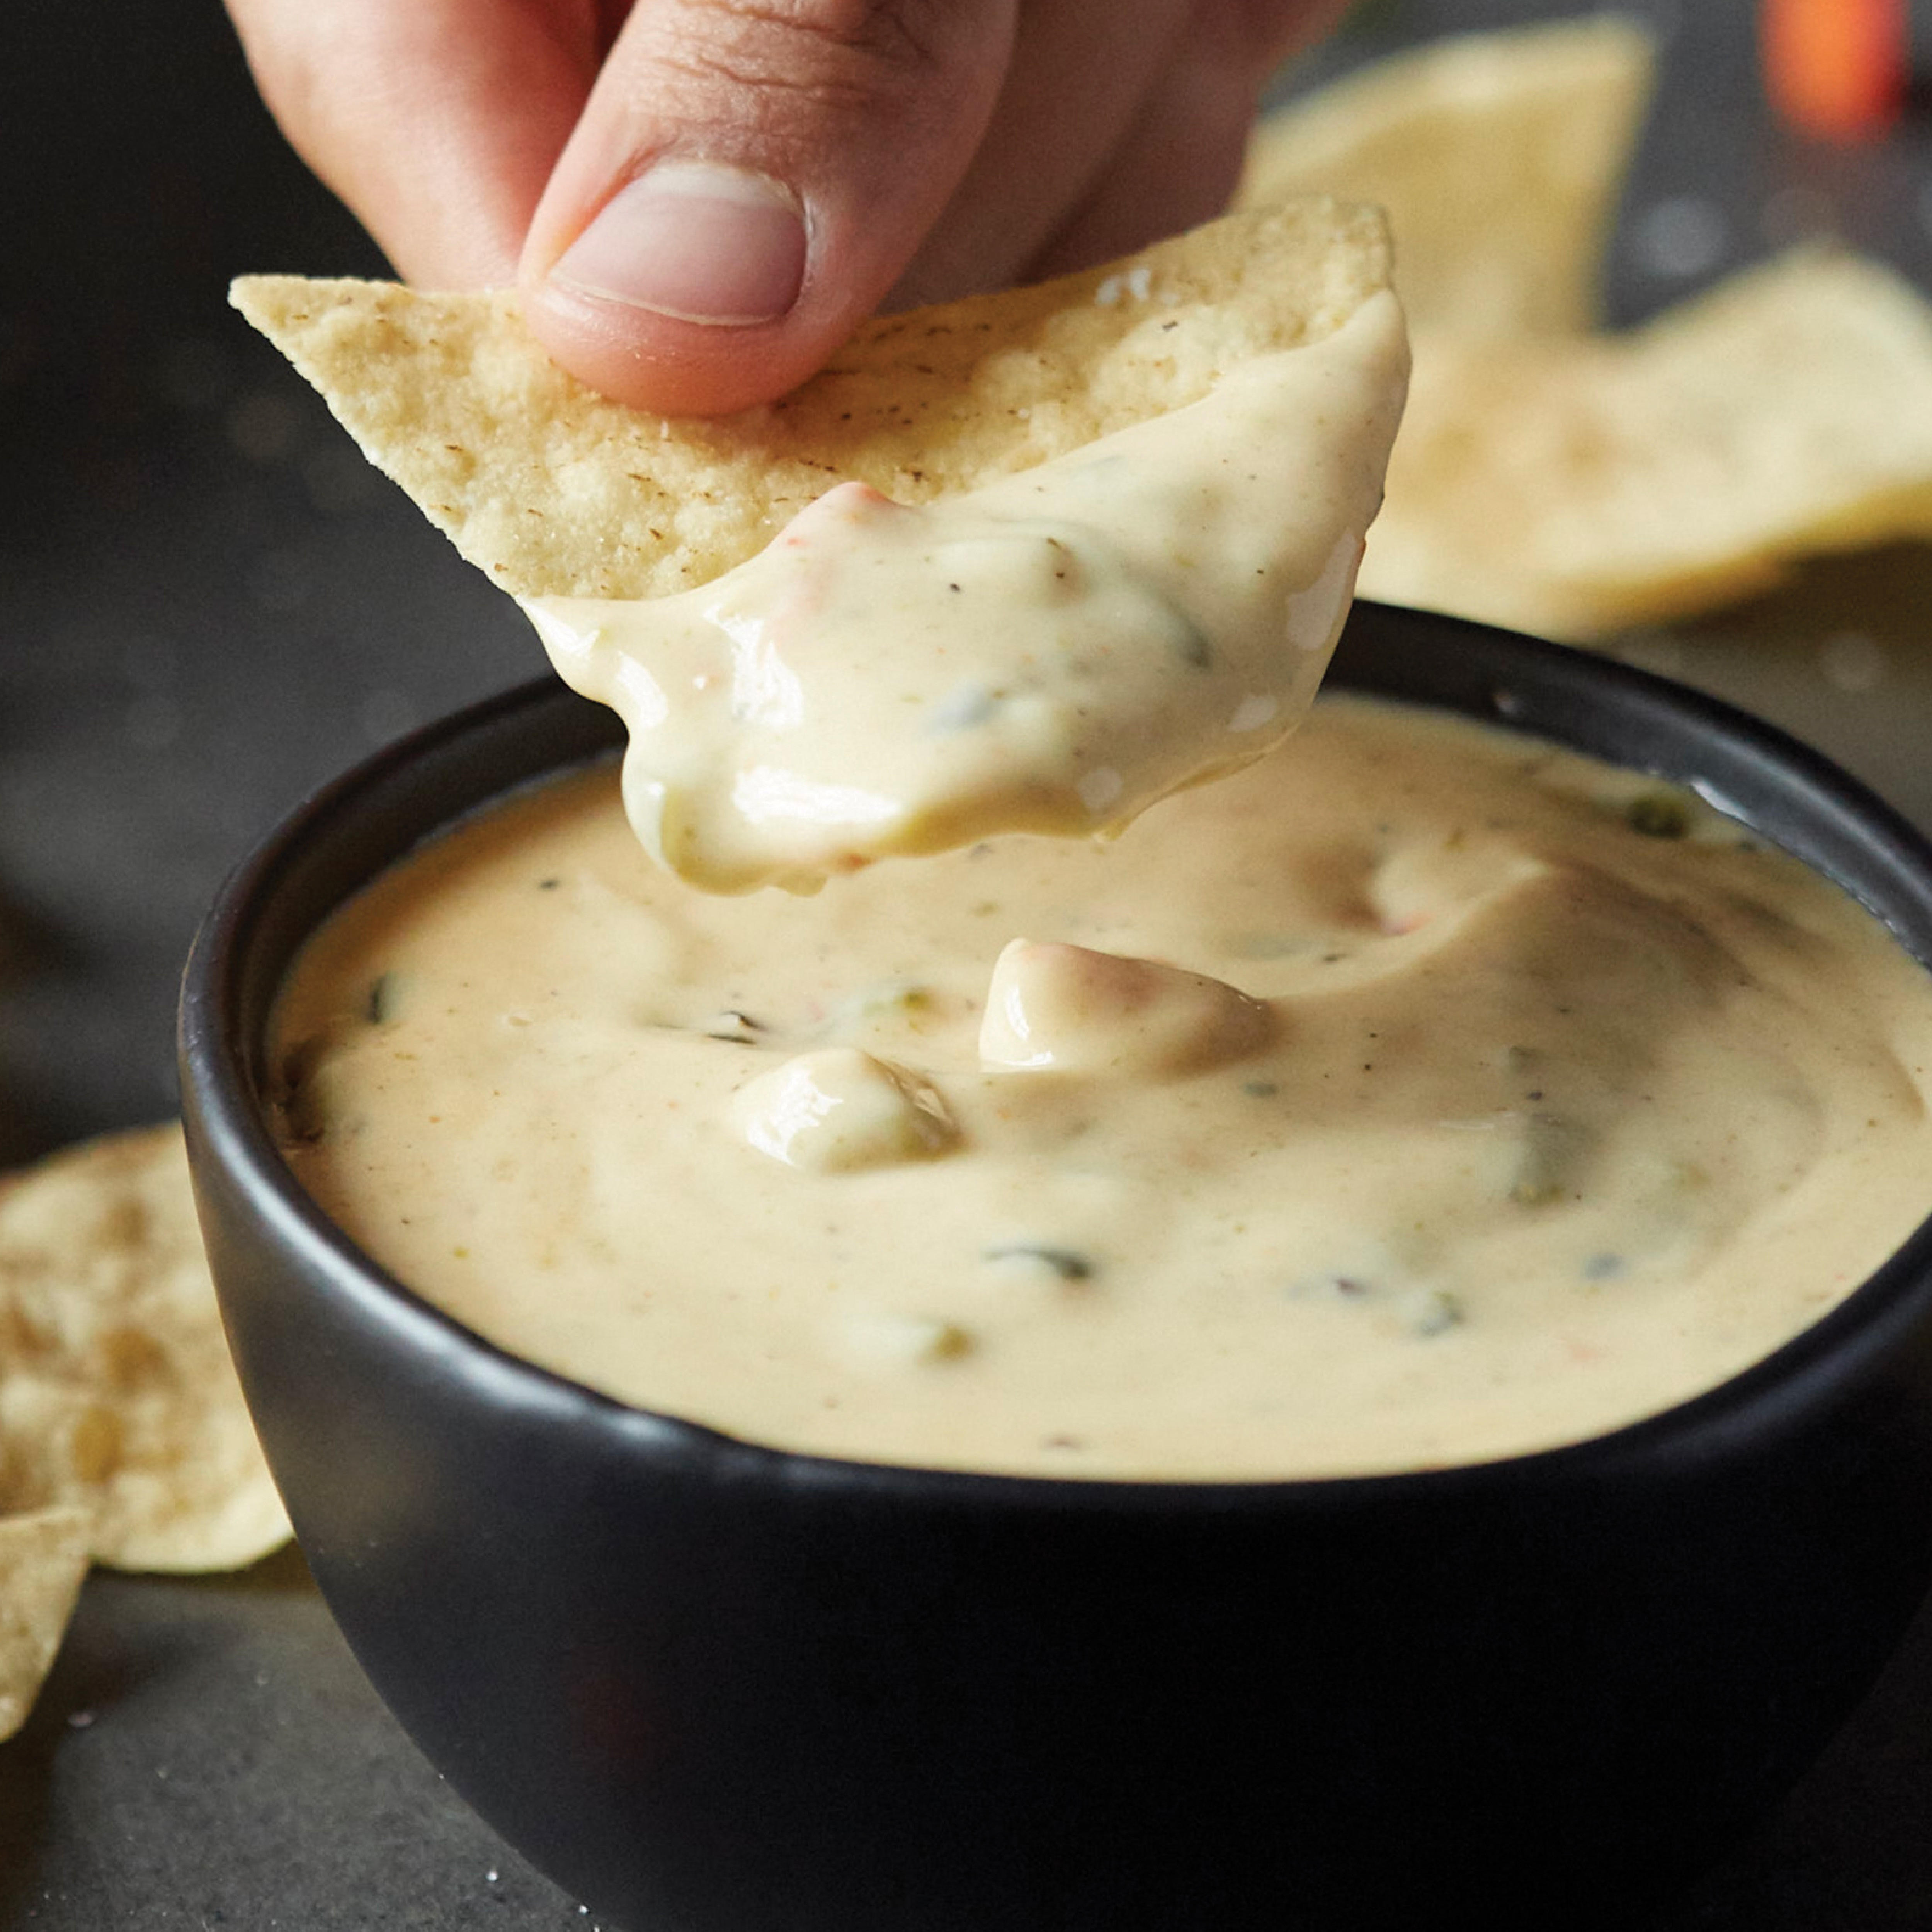 QDOBA's signature 3-cheese queso pairs perfectly with fried in-house tortilla chips or on any entrée at no additional charge!